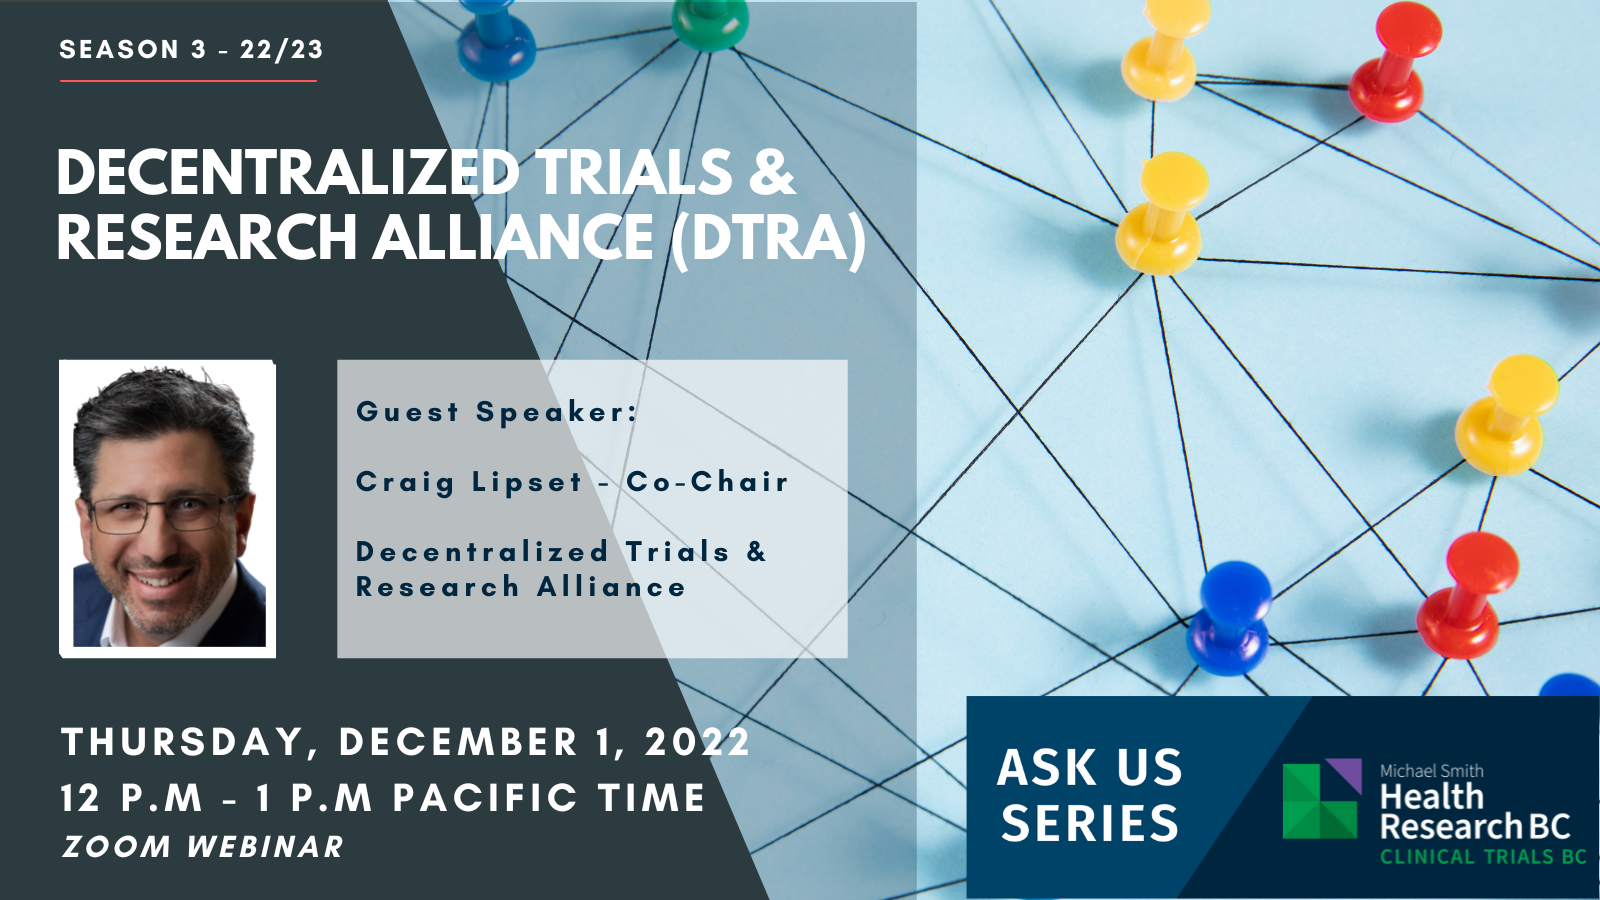 ASK US Series: Decentralized Trials & Research Alliance (DTRA)